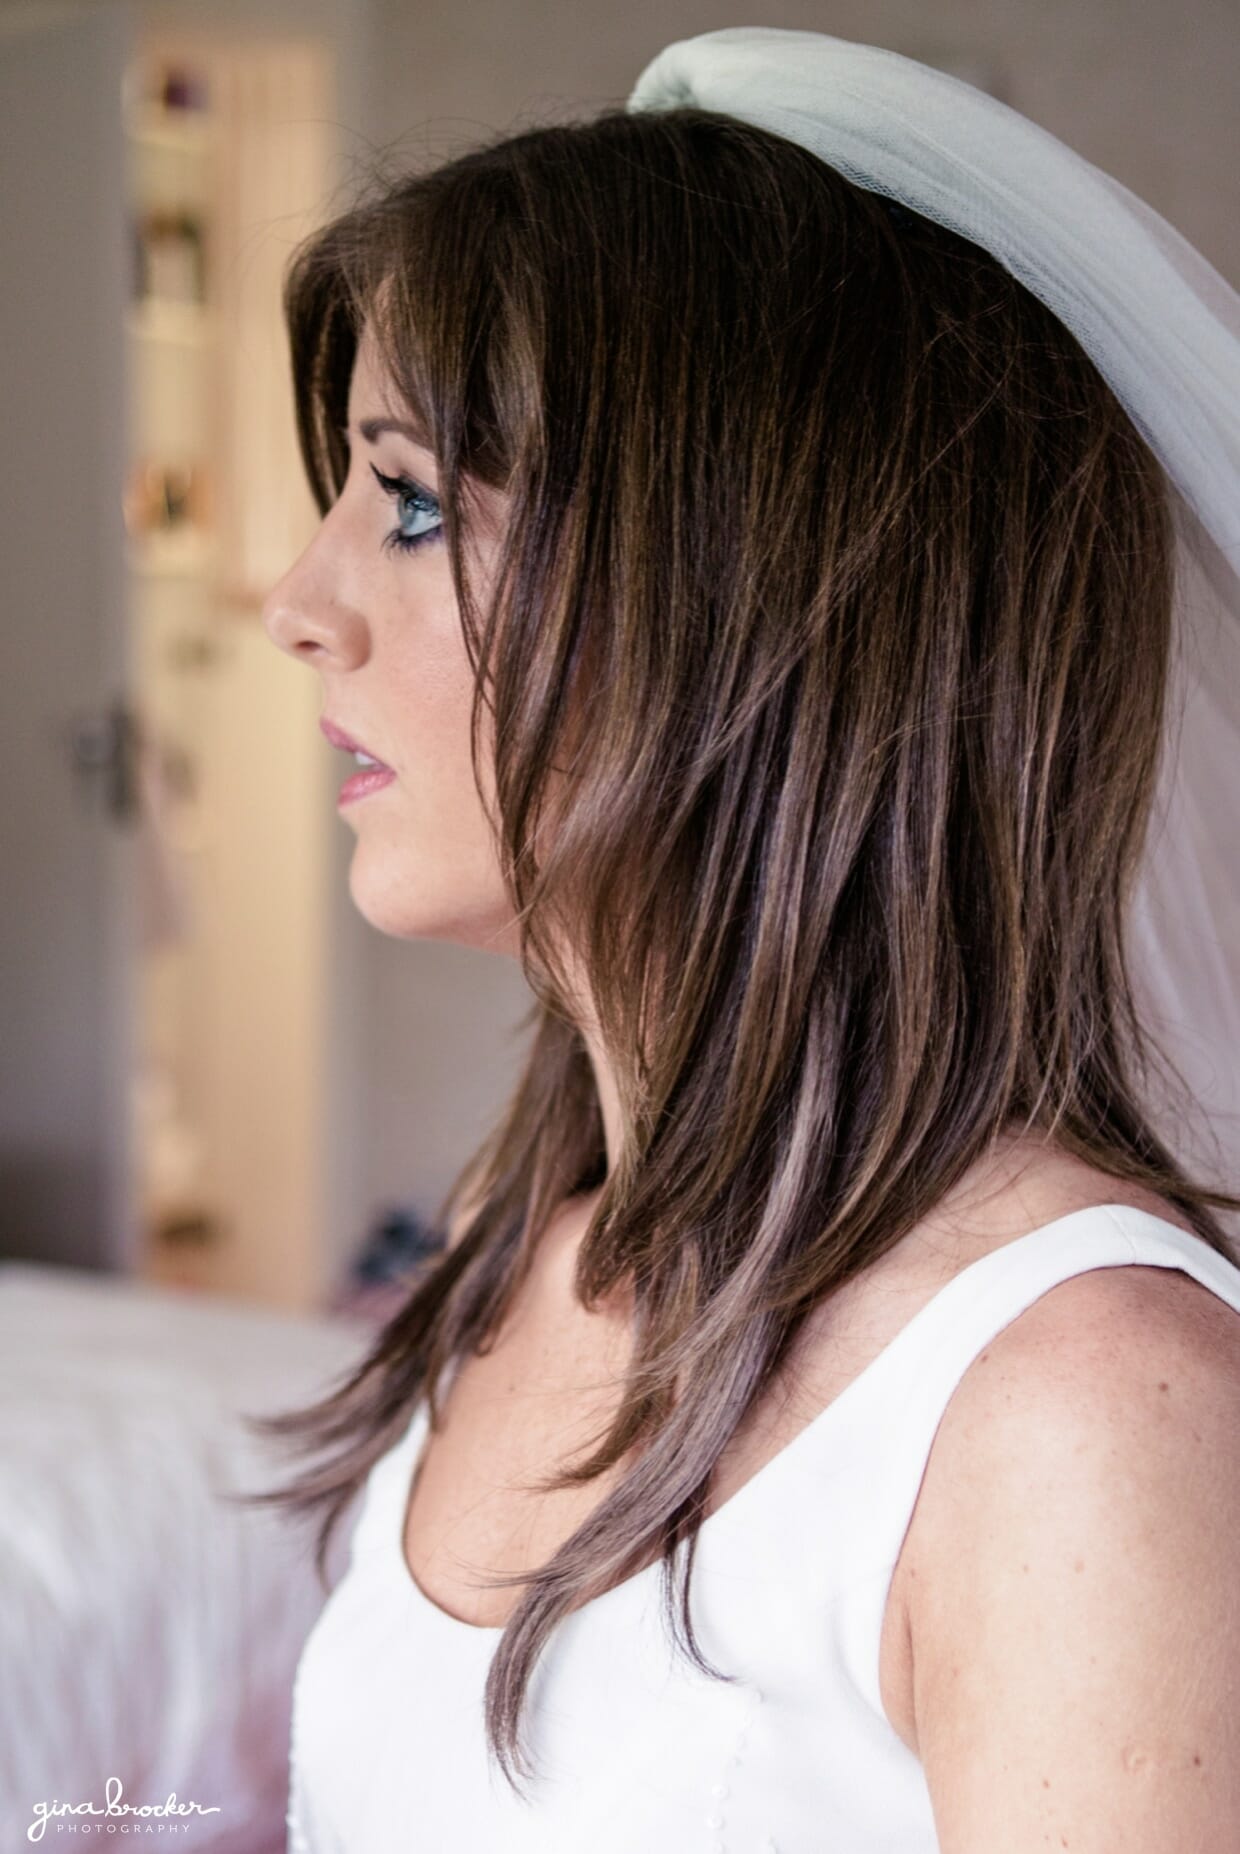 The bride puts on her veil on the morning of her natural, colorful and elegant wedding